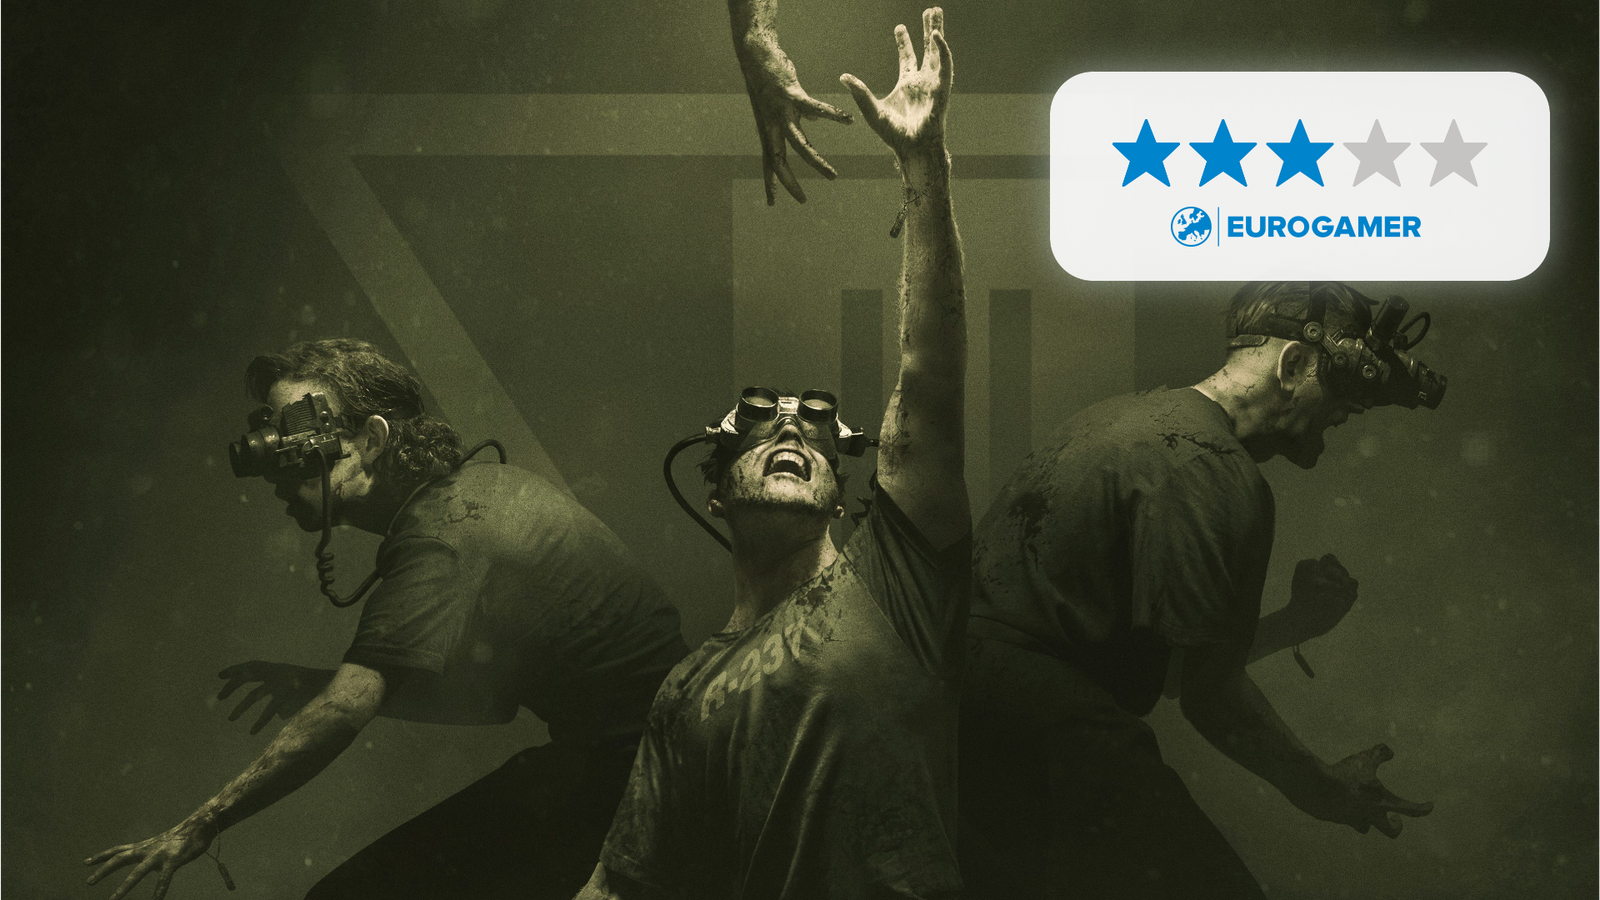 Outlast: Most Up-to-Date Encyclopedia, News & Reviews